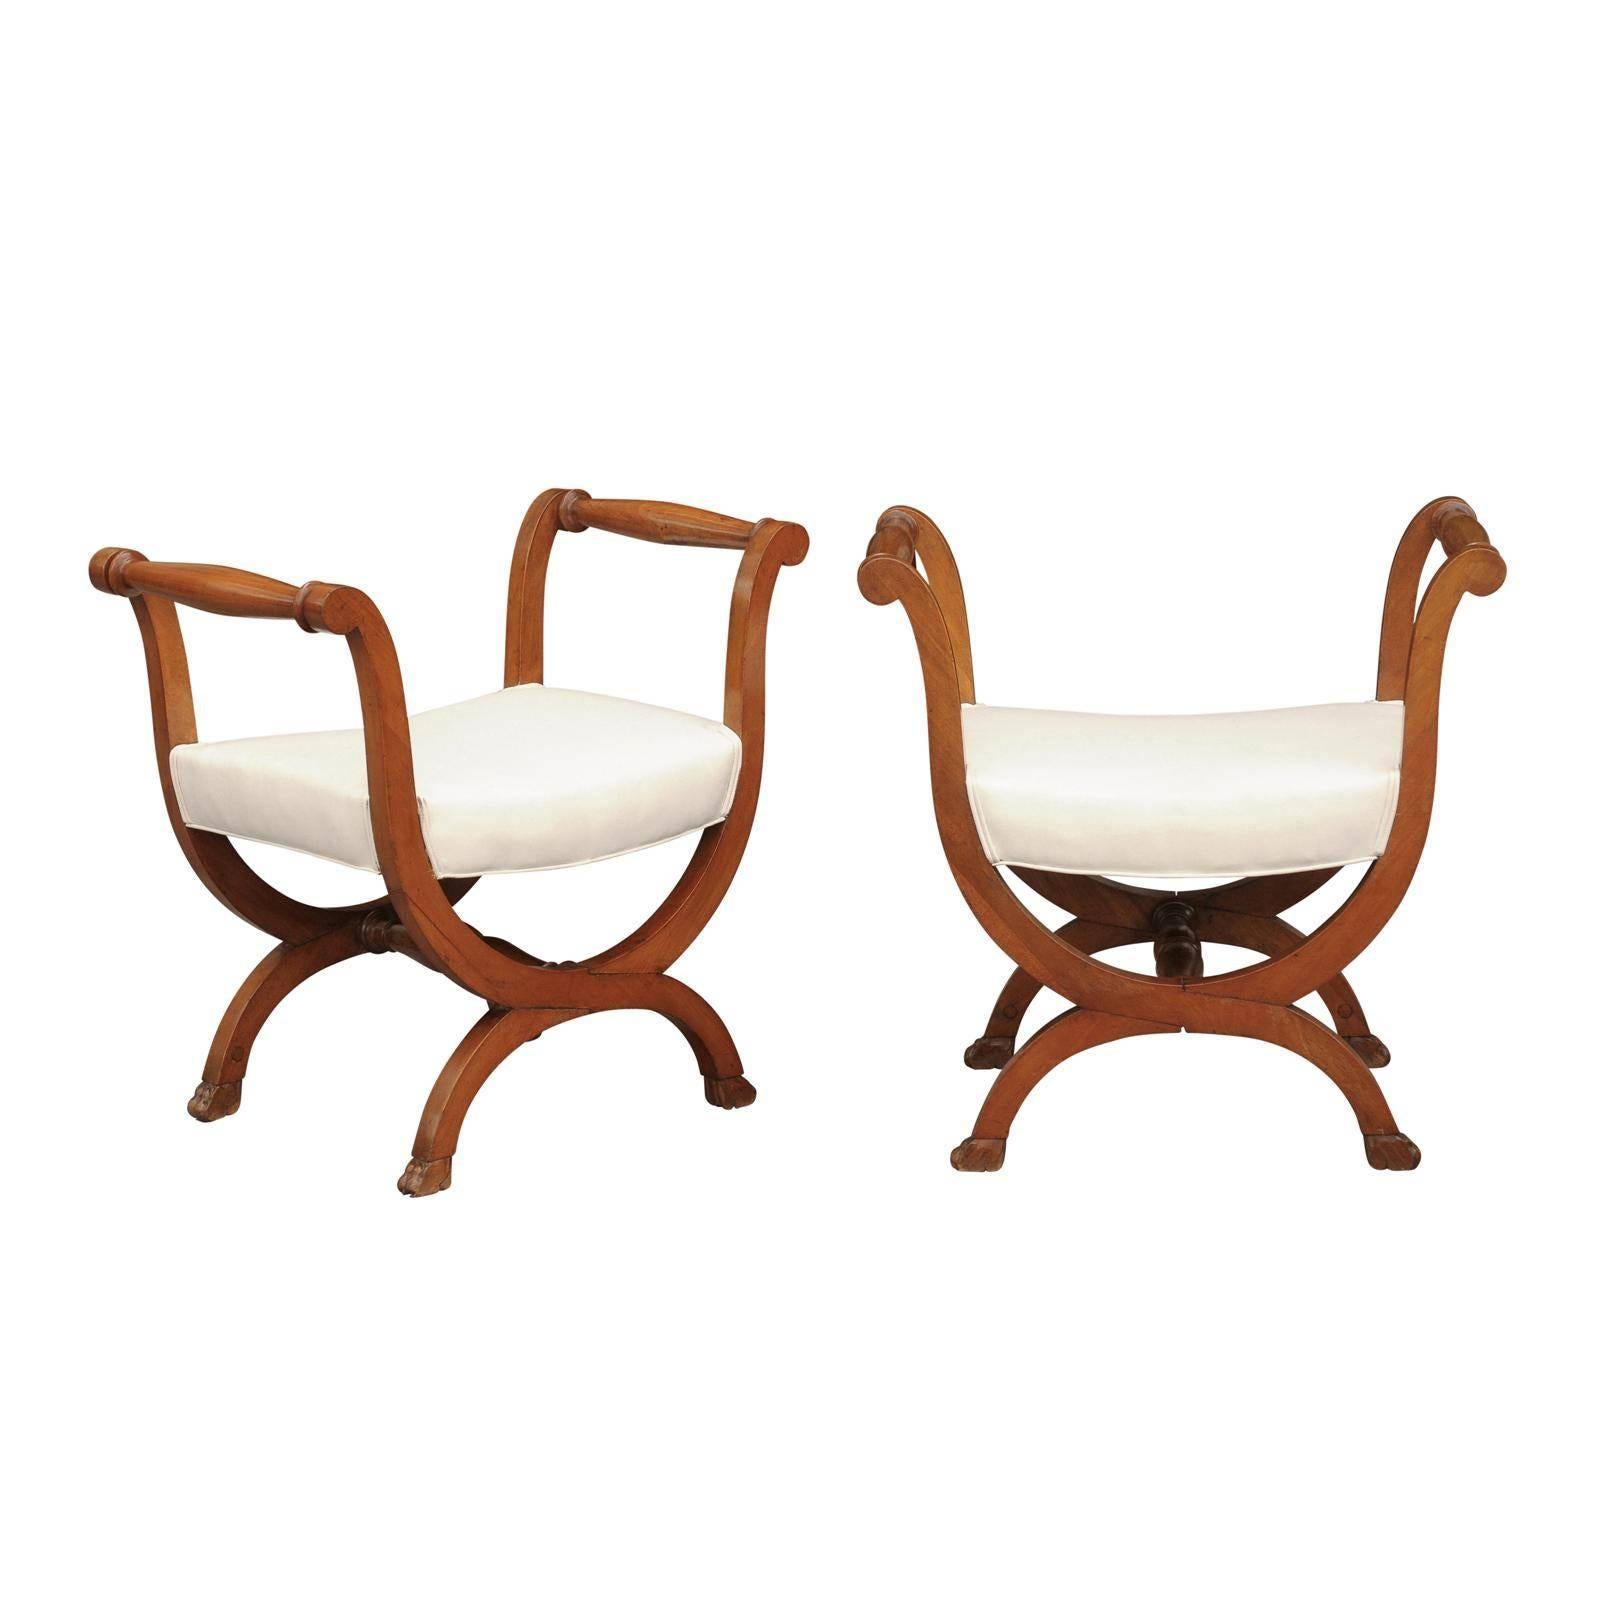 Pair of Biedermeier Austrian Bassinet-Shaped Stools from the Late 19th Century